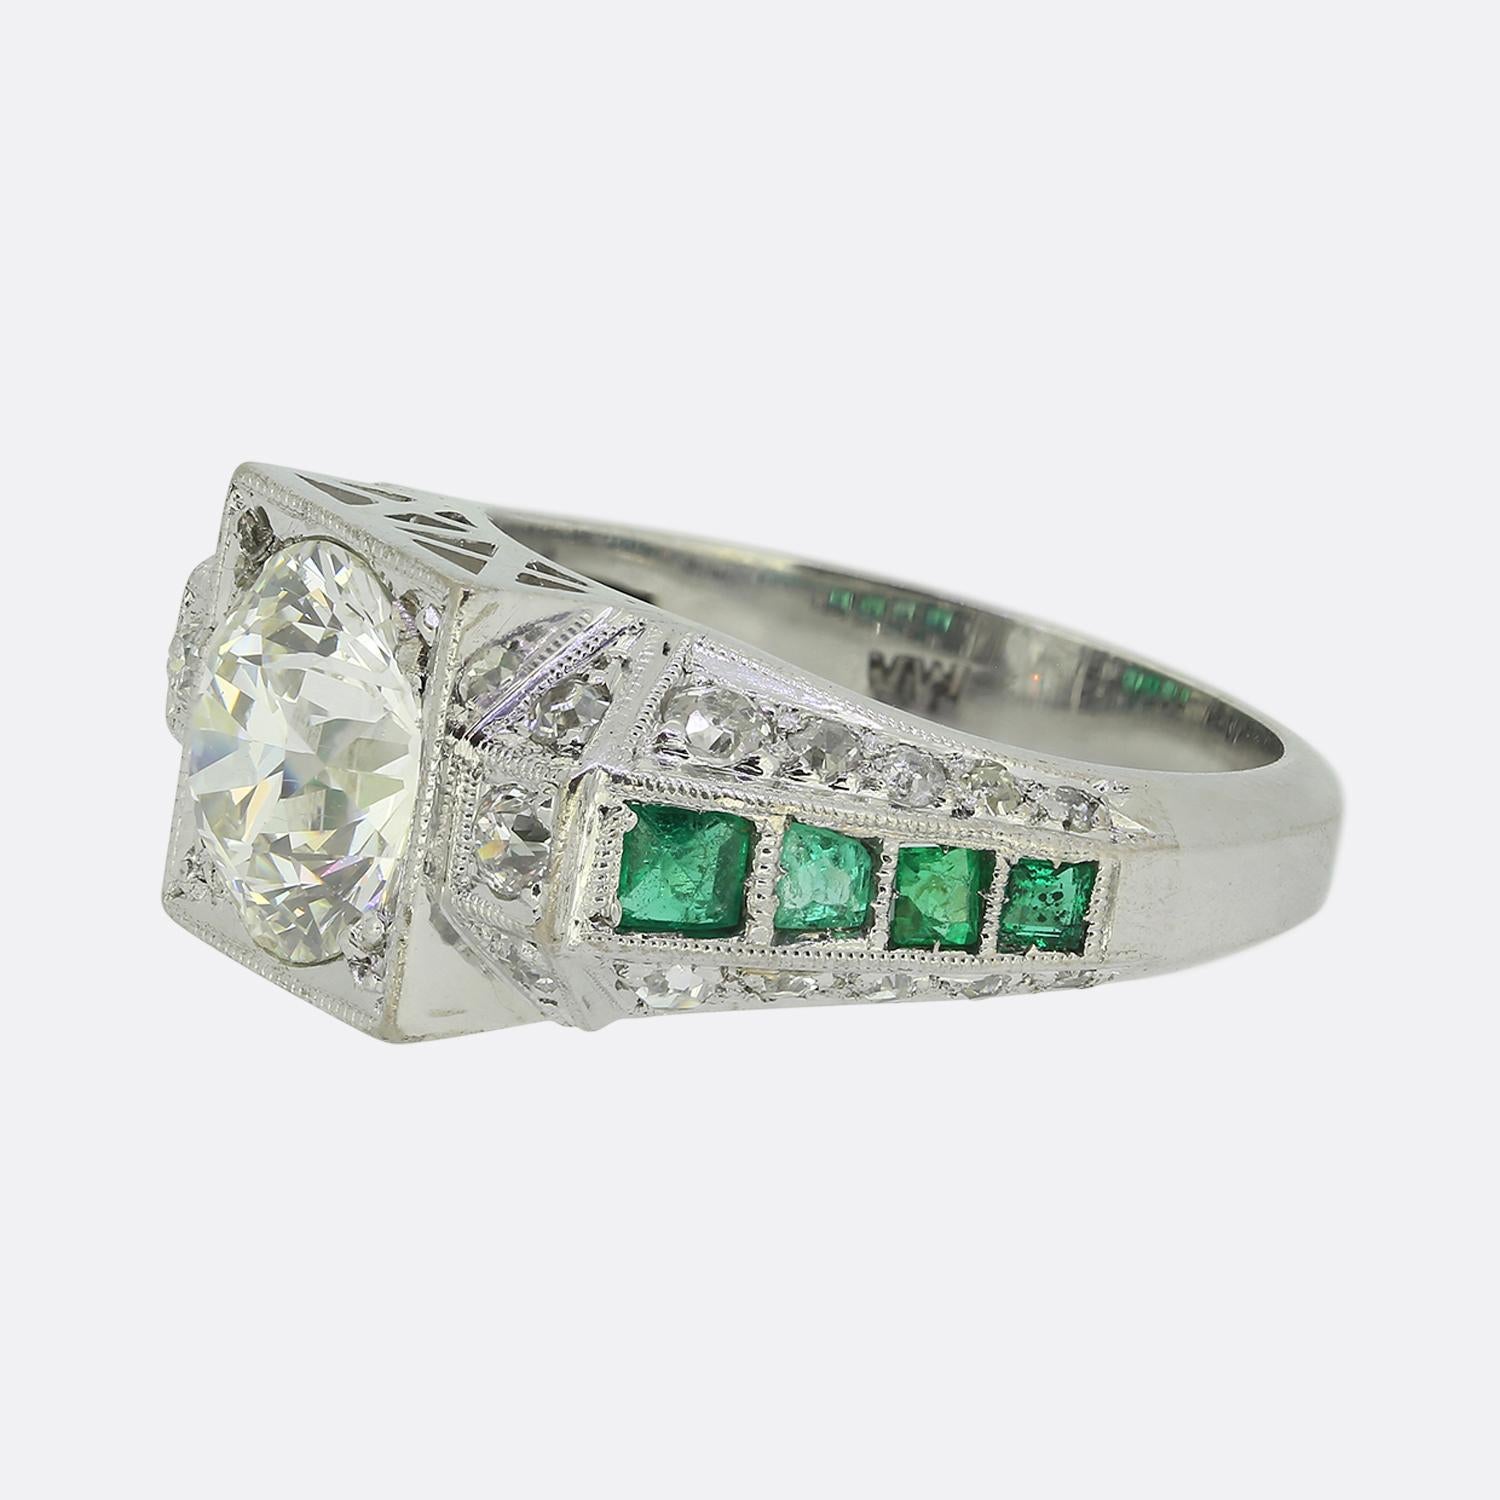 Here we have a remarkable piece created at a time when the Art Deco style was at the height of world design. This ring has been crafted from 14ct white gold and presents a breathtaking 2.65ct round faceted old European cut diamond at the centre of